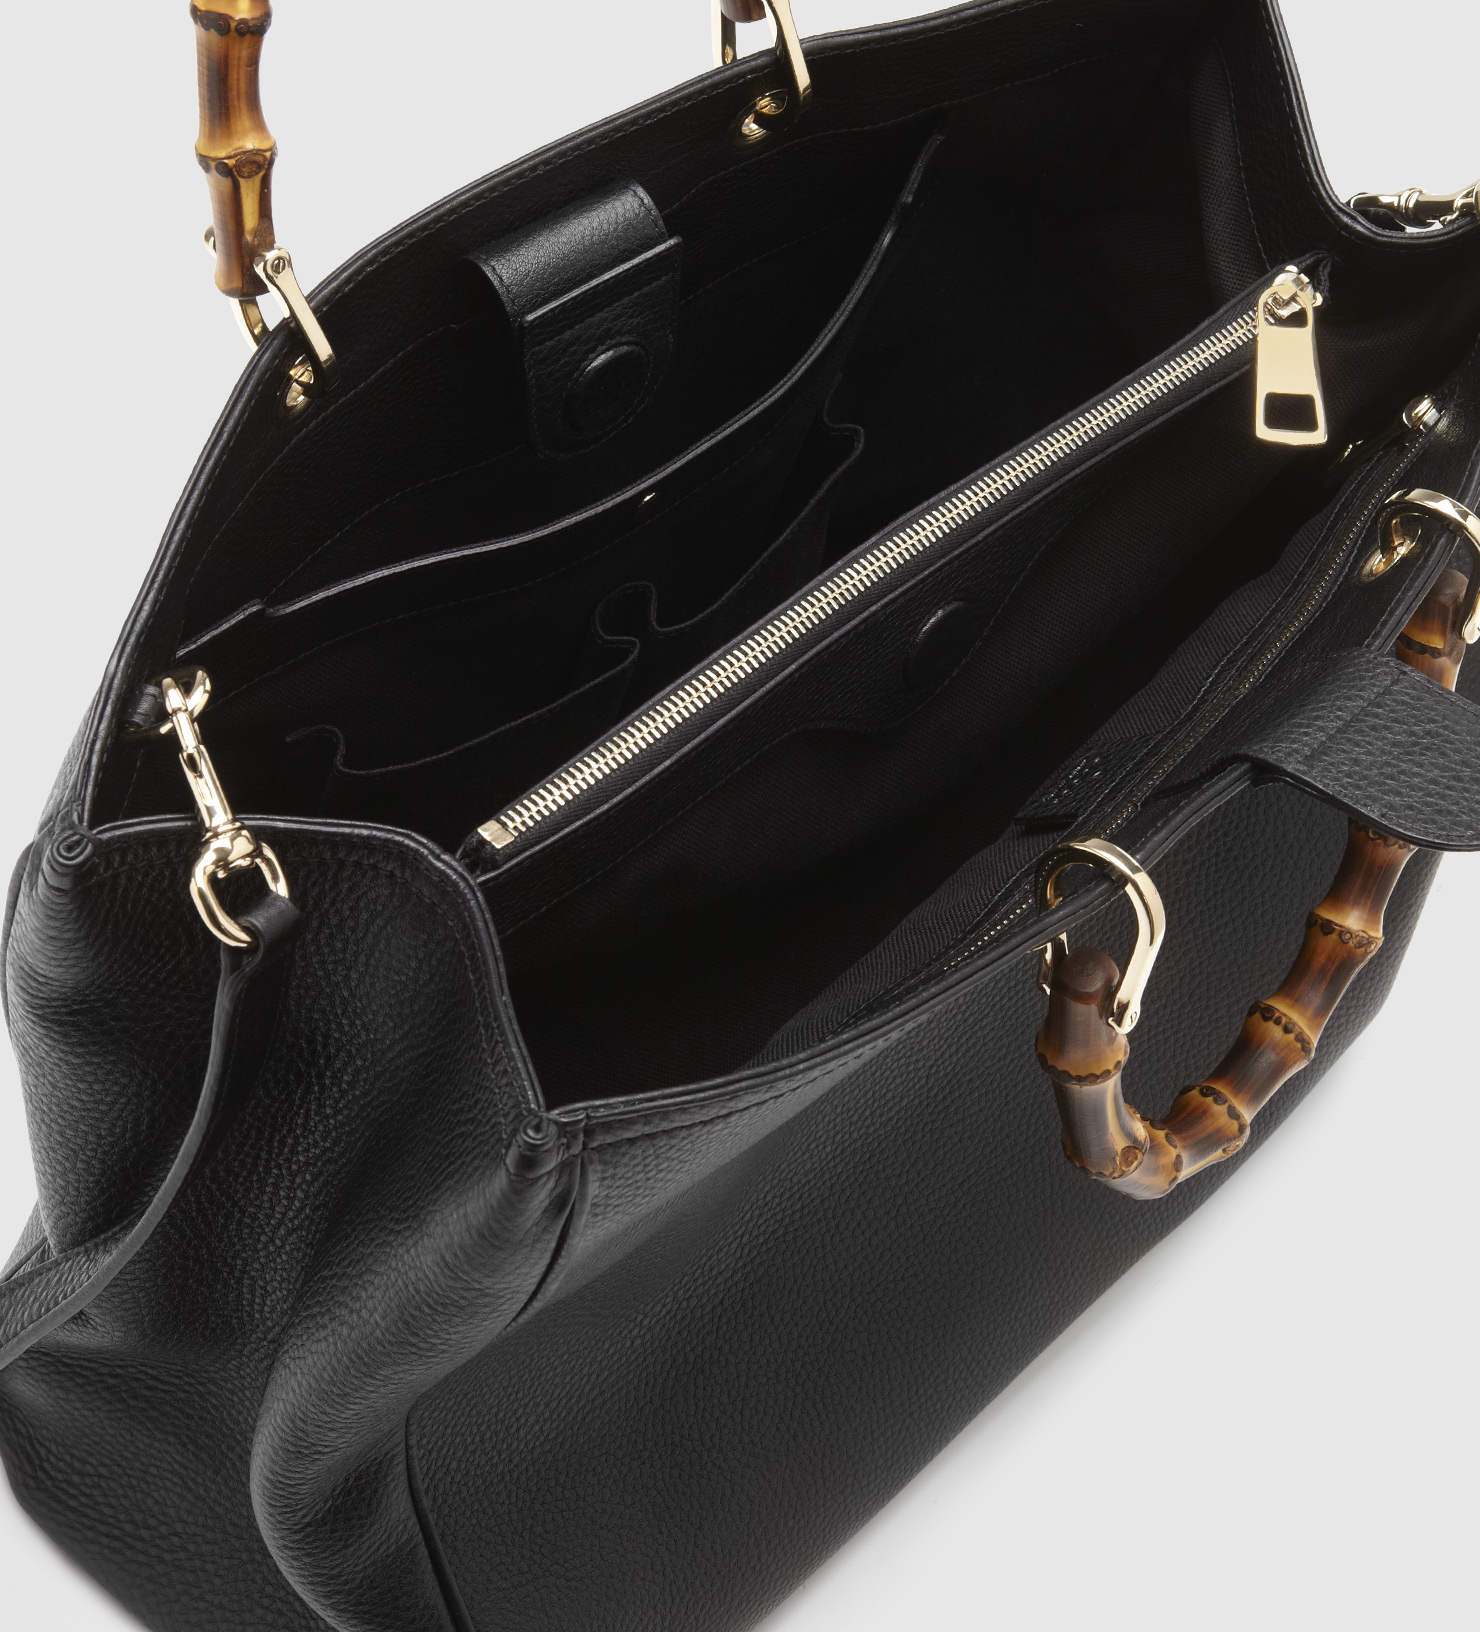 Gucci Bamboo Leather Tote in Black | Lyst